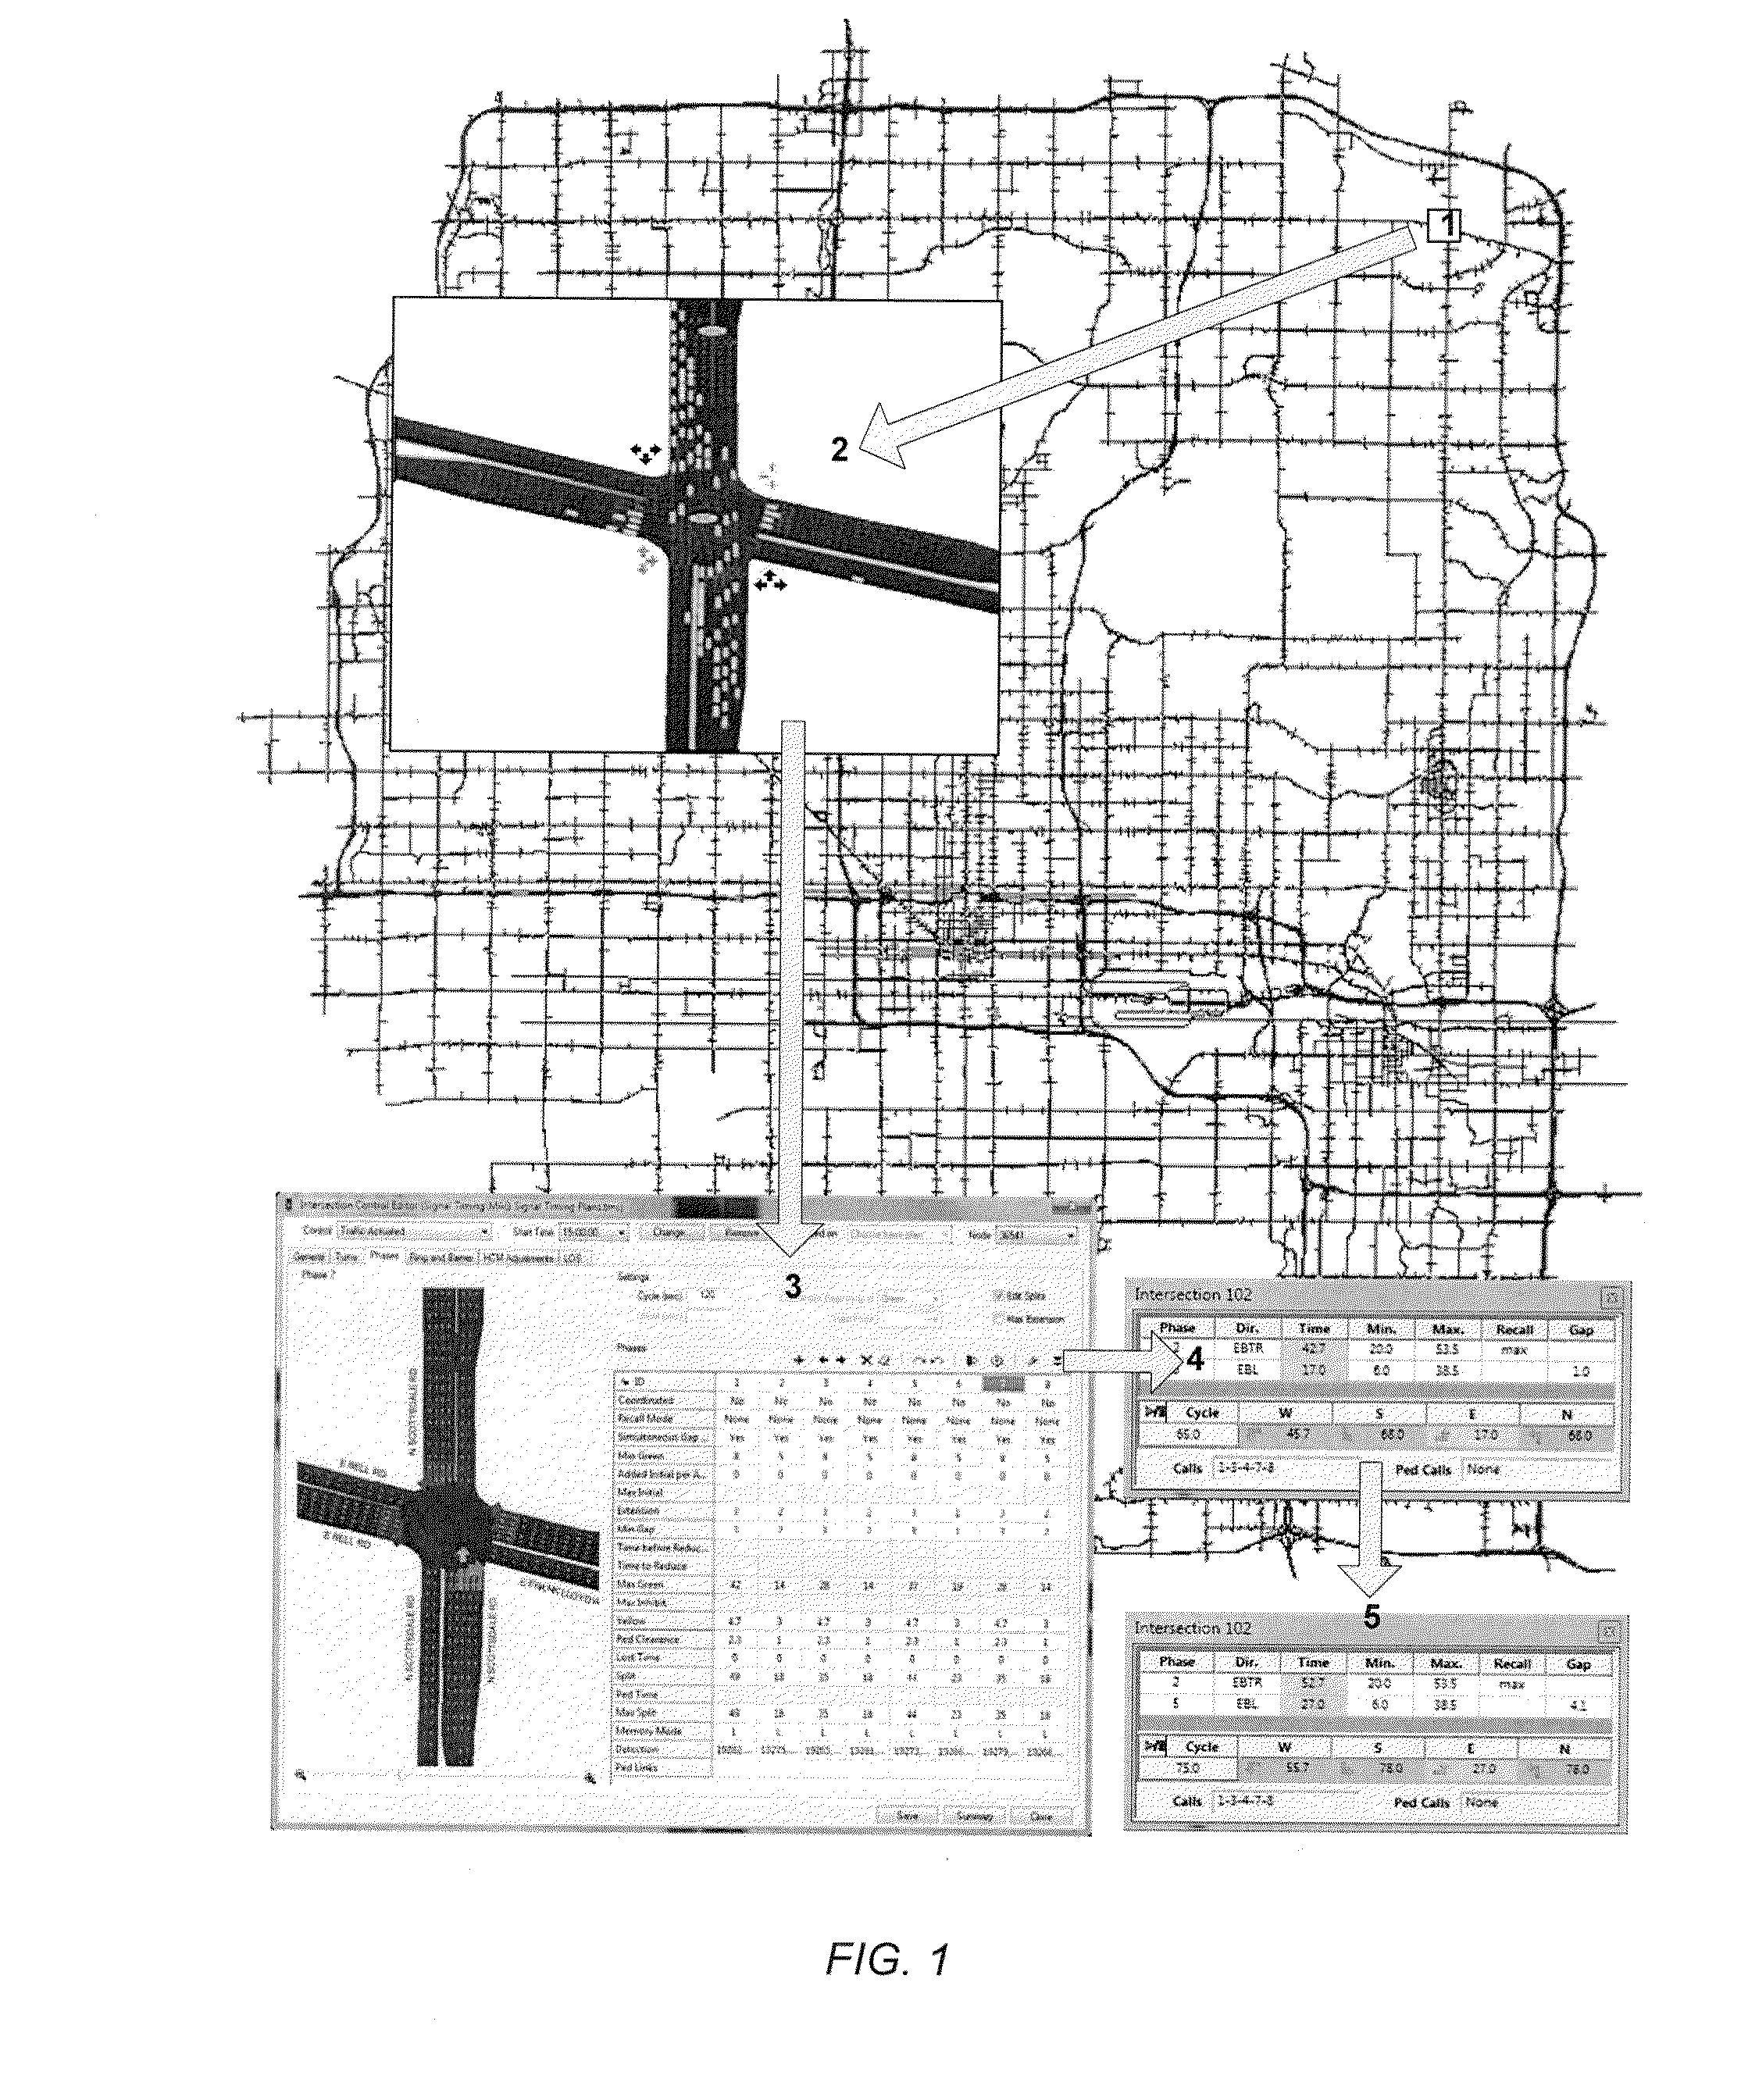 Lane-level vehicle navigation for vehicle routing and traffic management